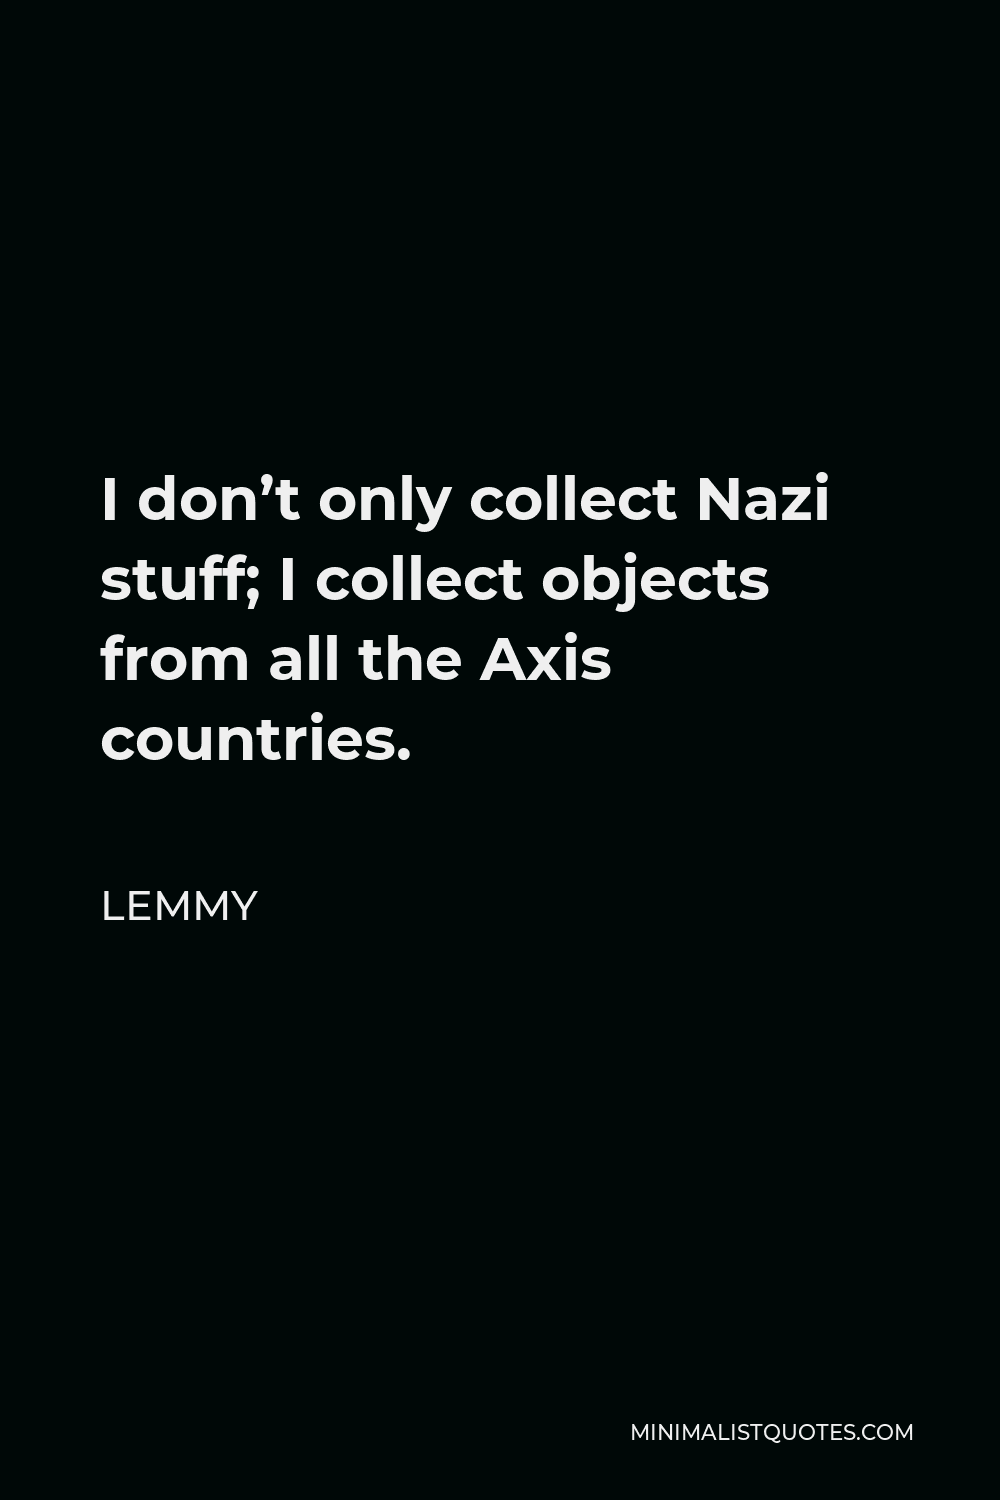 Lemmy Quote - I don’t only collect Nazi stuff; I collect objects from all the Axis countries.